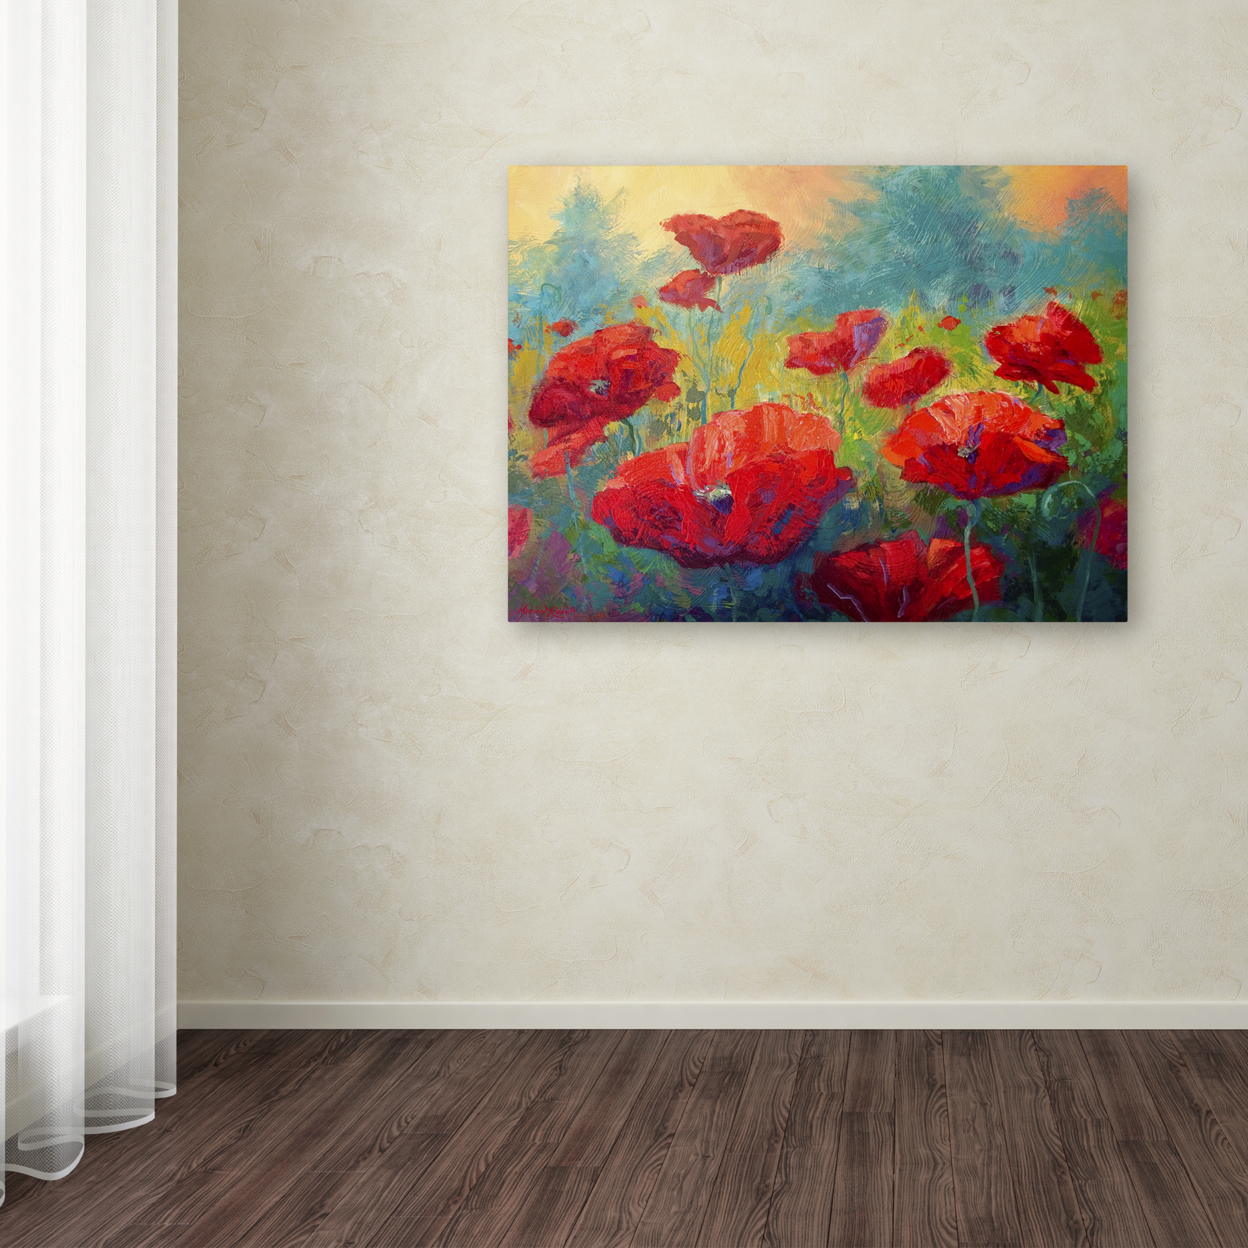 Marion Rose 'Field Of Poppies' Ready To Hang Canvas Art 18 X 24 Inches Made In USA